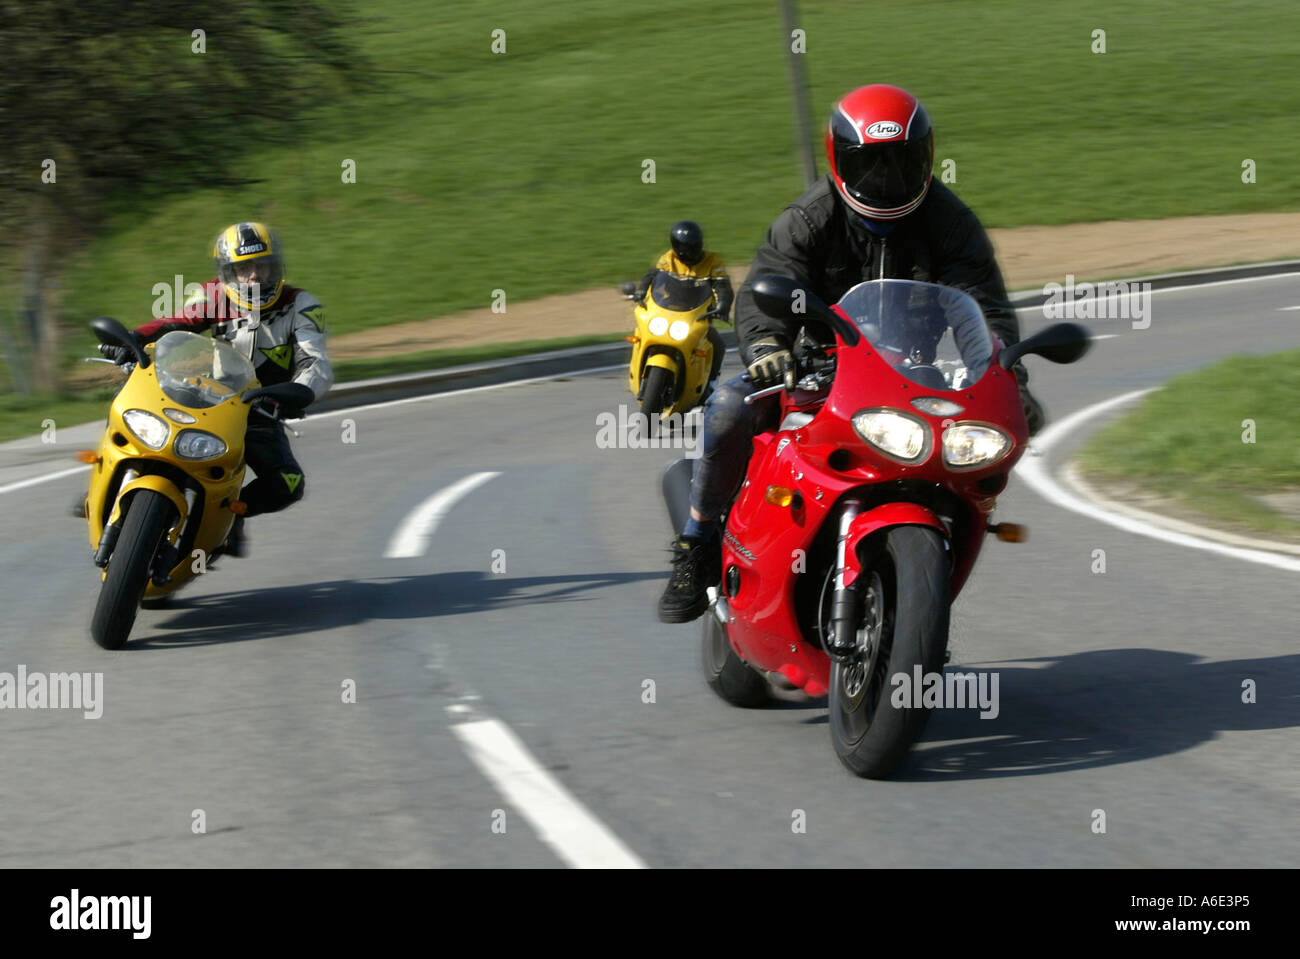 DEU 15.04.2004, motorcyclists in the Oden forest near Heidelberg Stock Photo